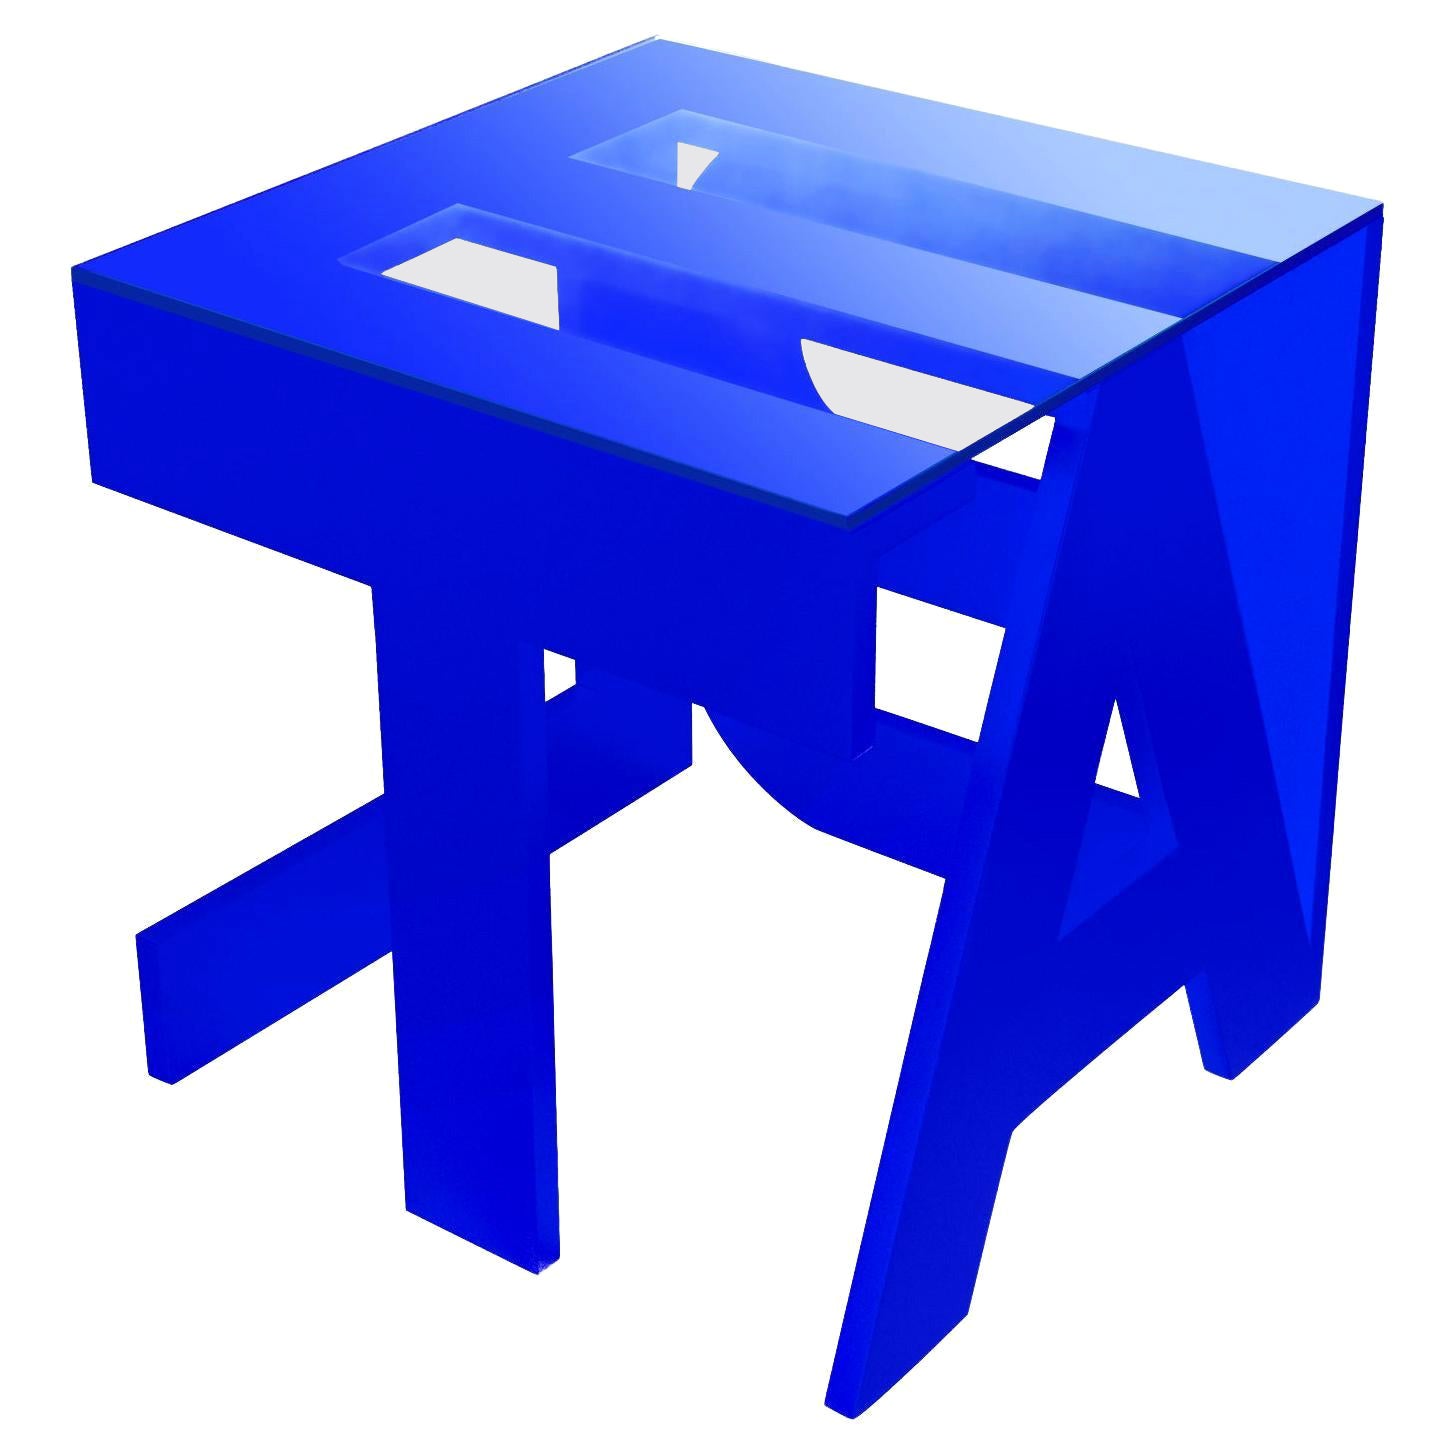 Blue "Table" Table by Roberta Rampazzo